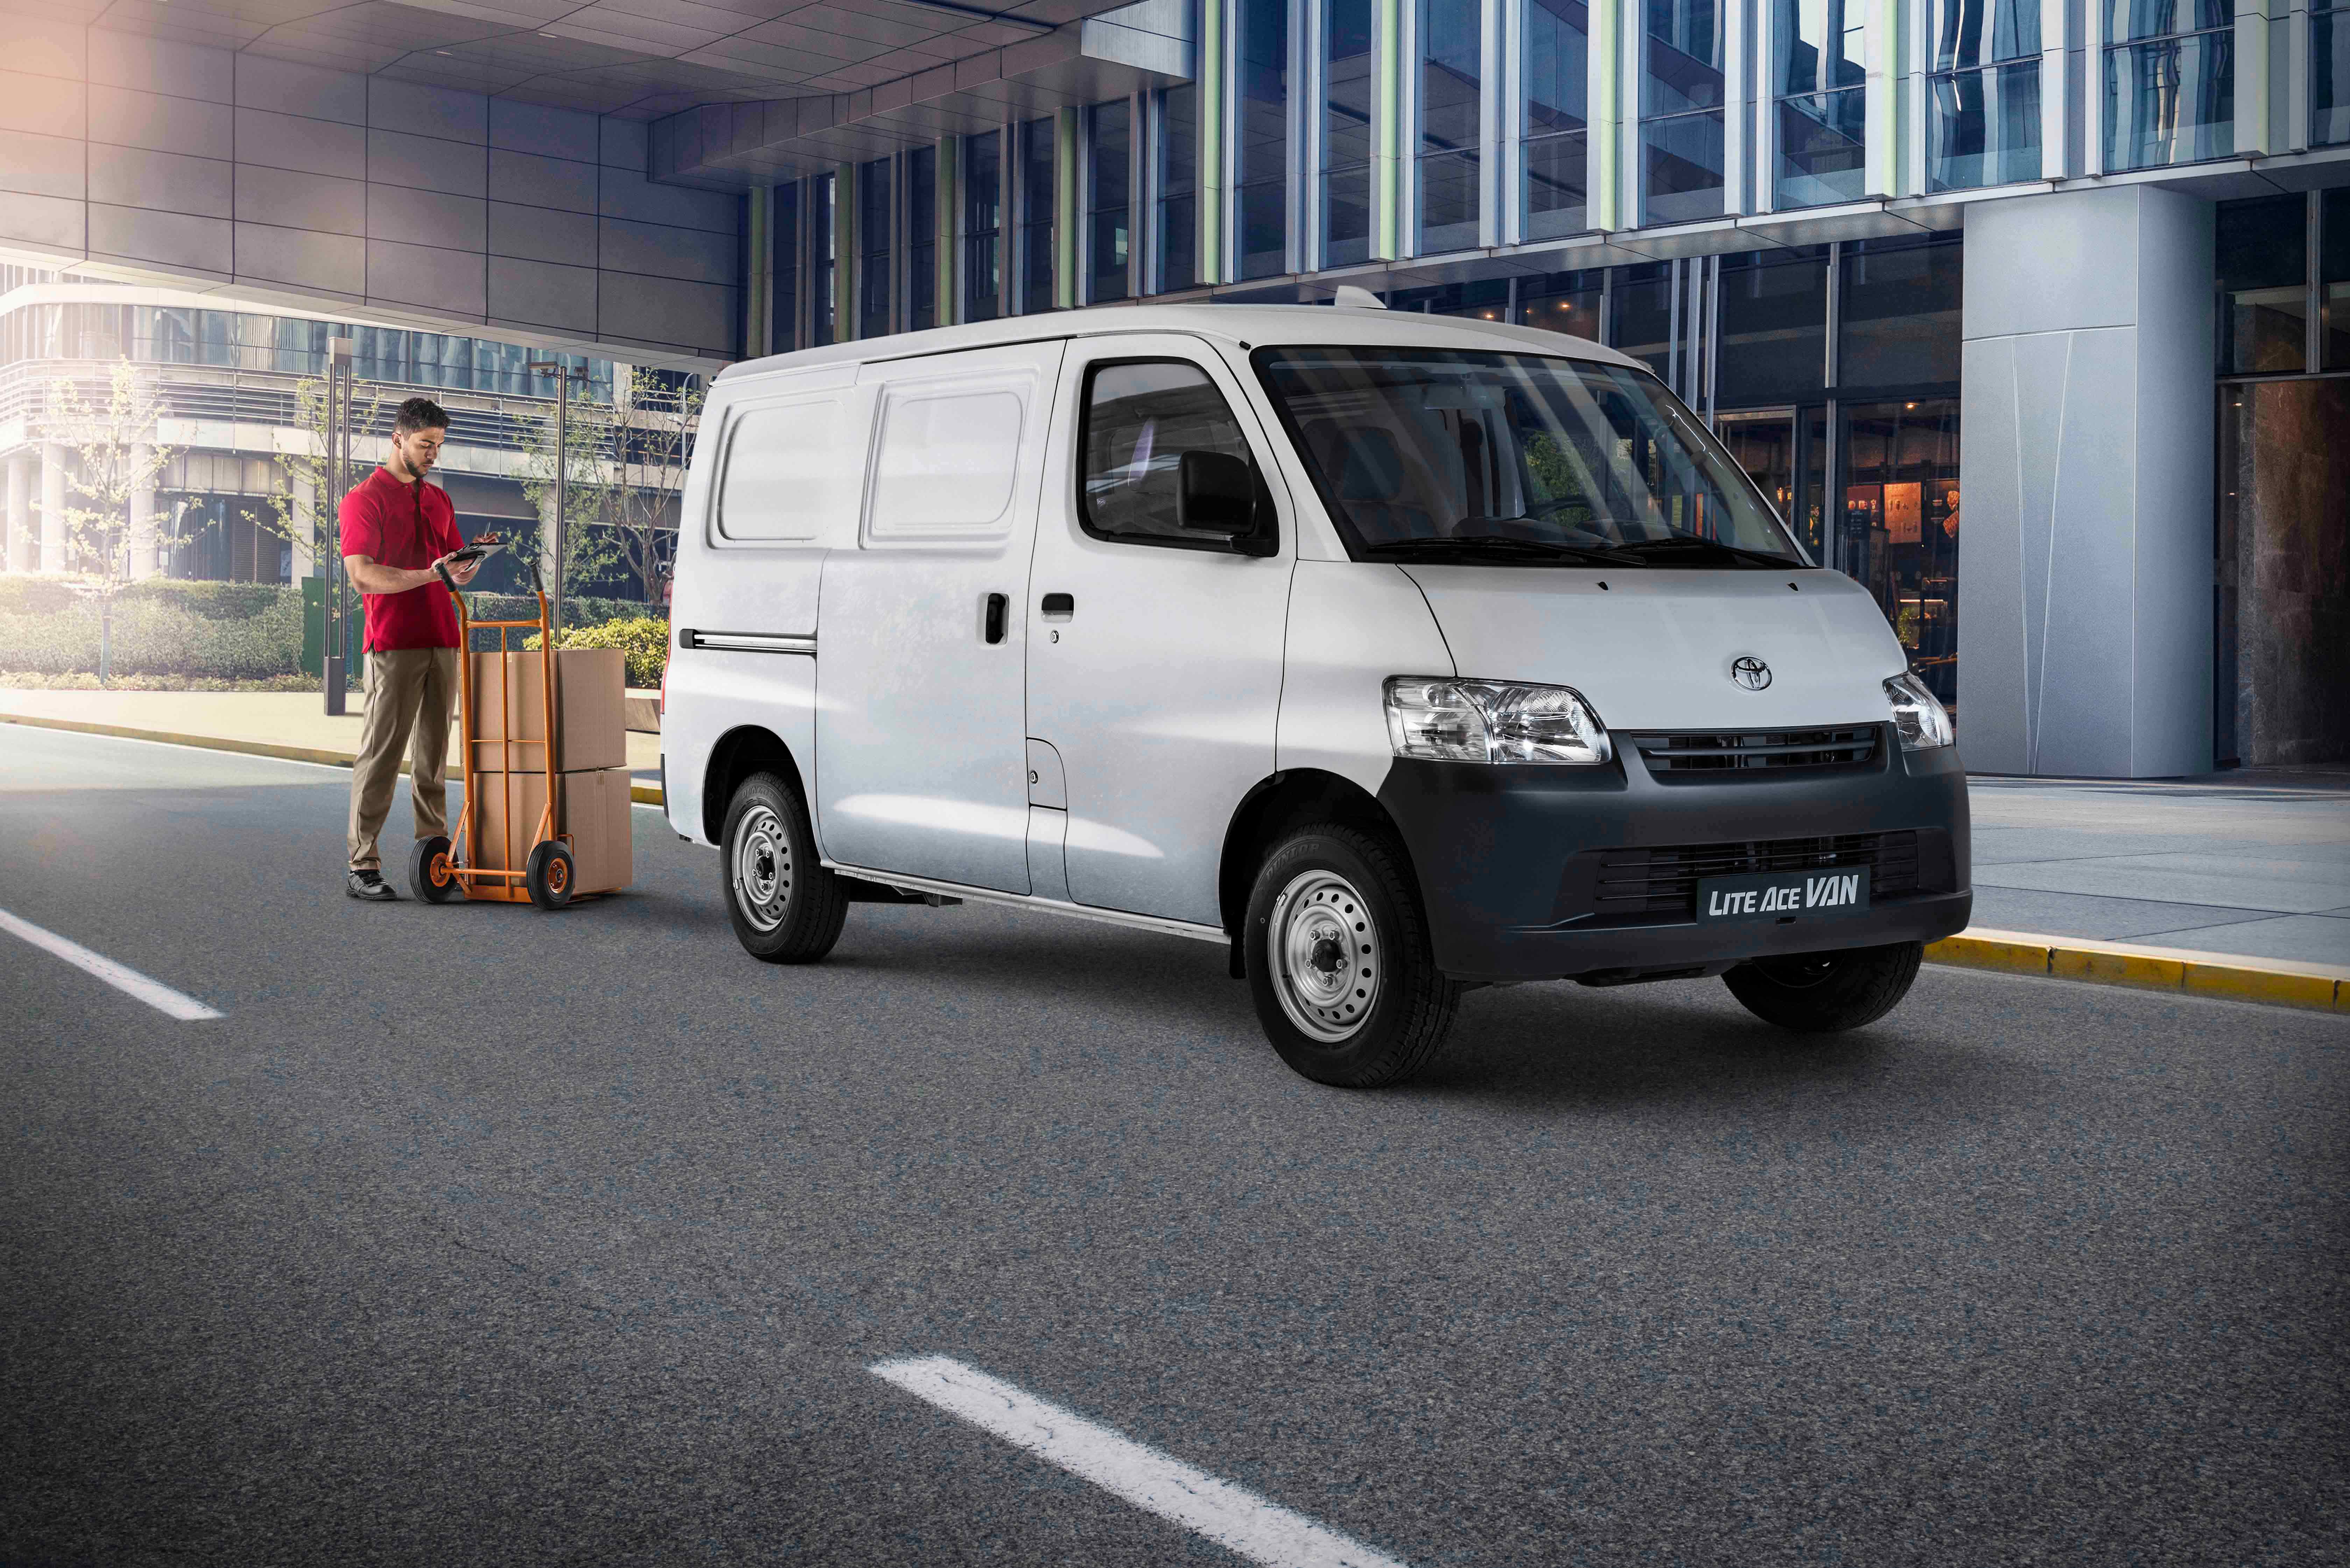 Launch of Toyota LITE ACE set to redefine the Middle East’s compact commercial vehicle segment